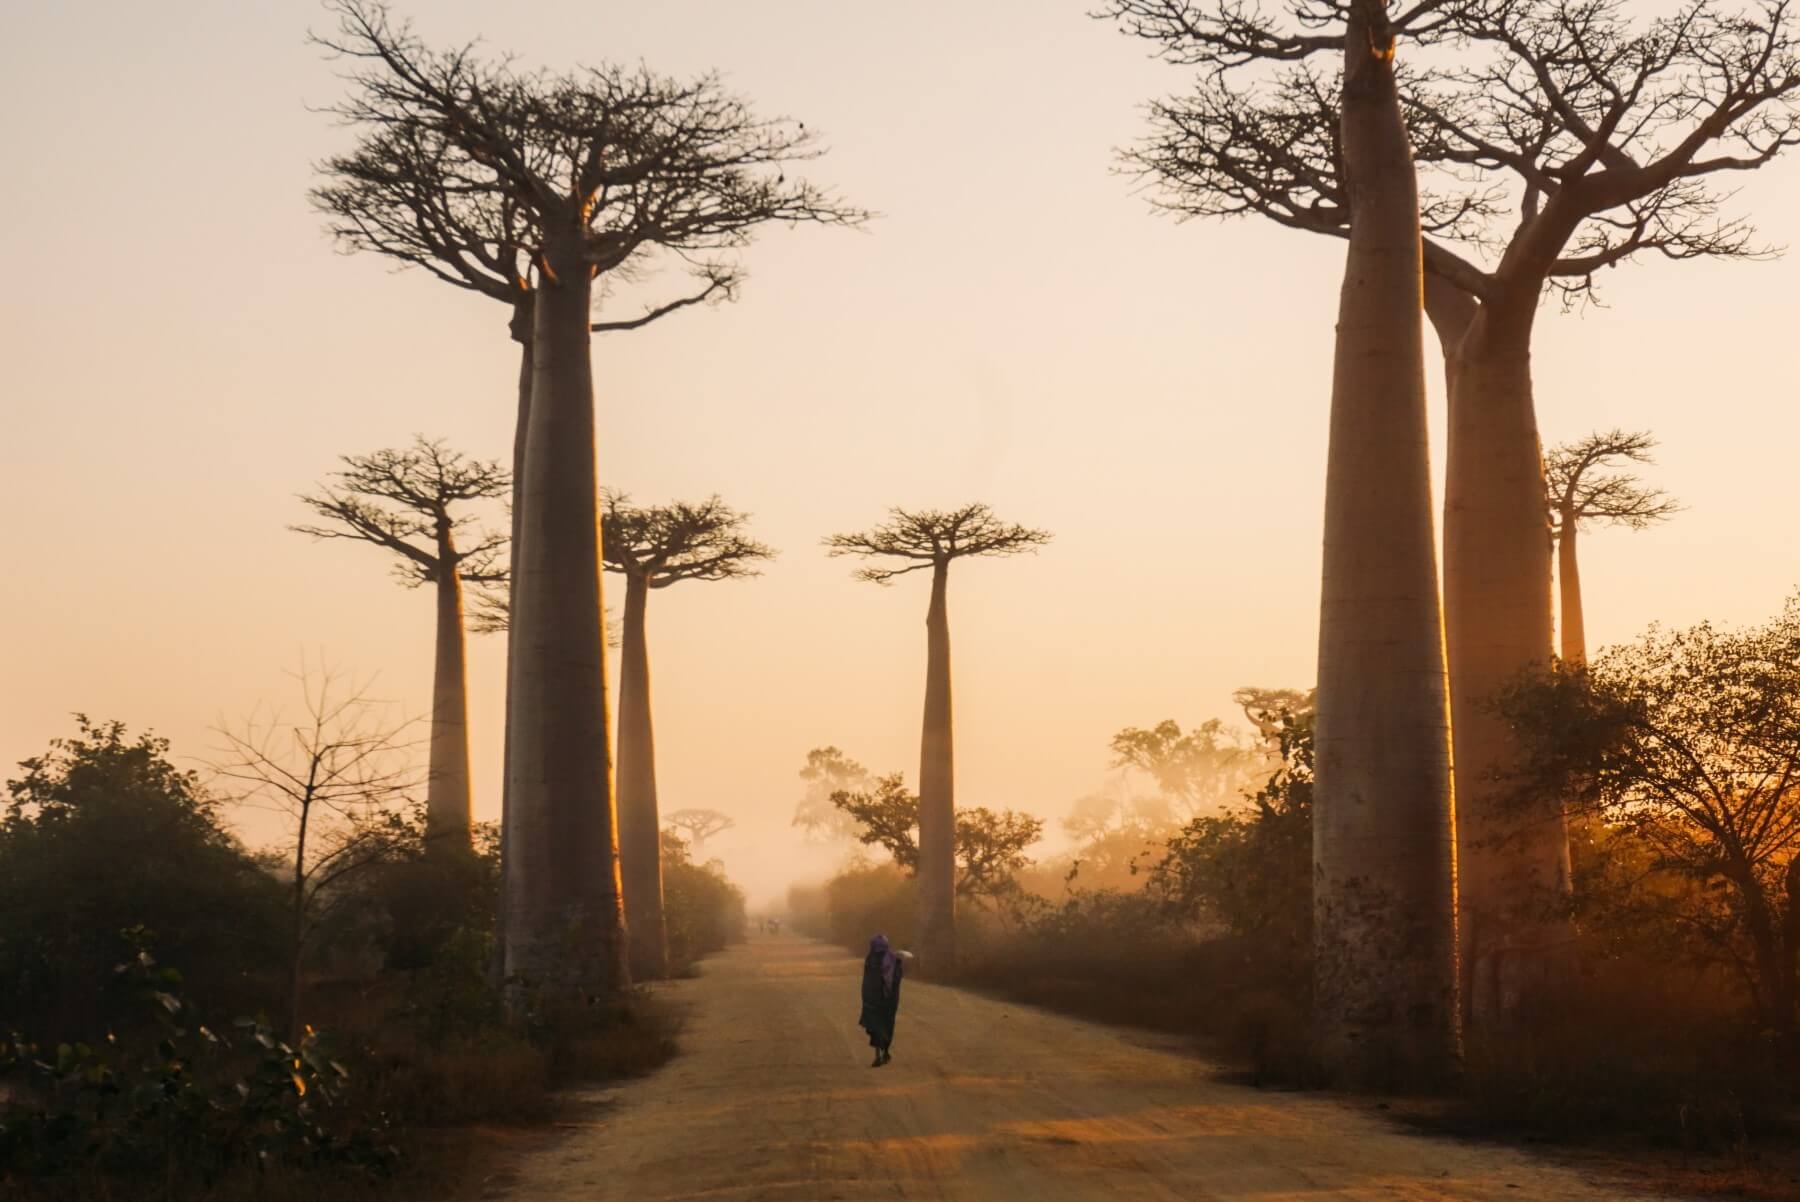 The famous "Baobab Alley" in Western Madagascar